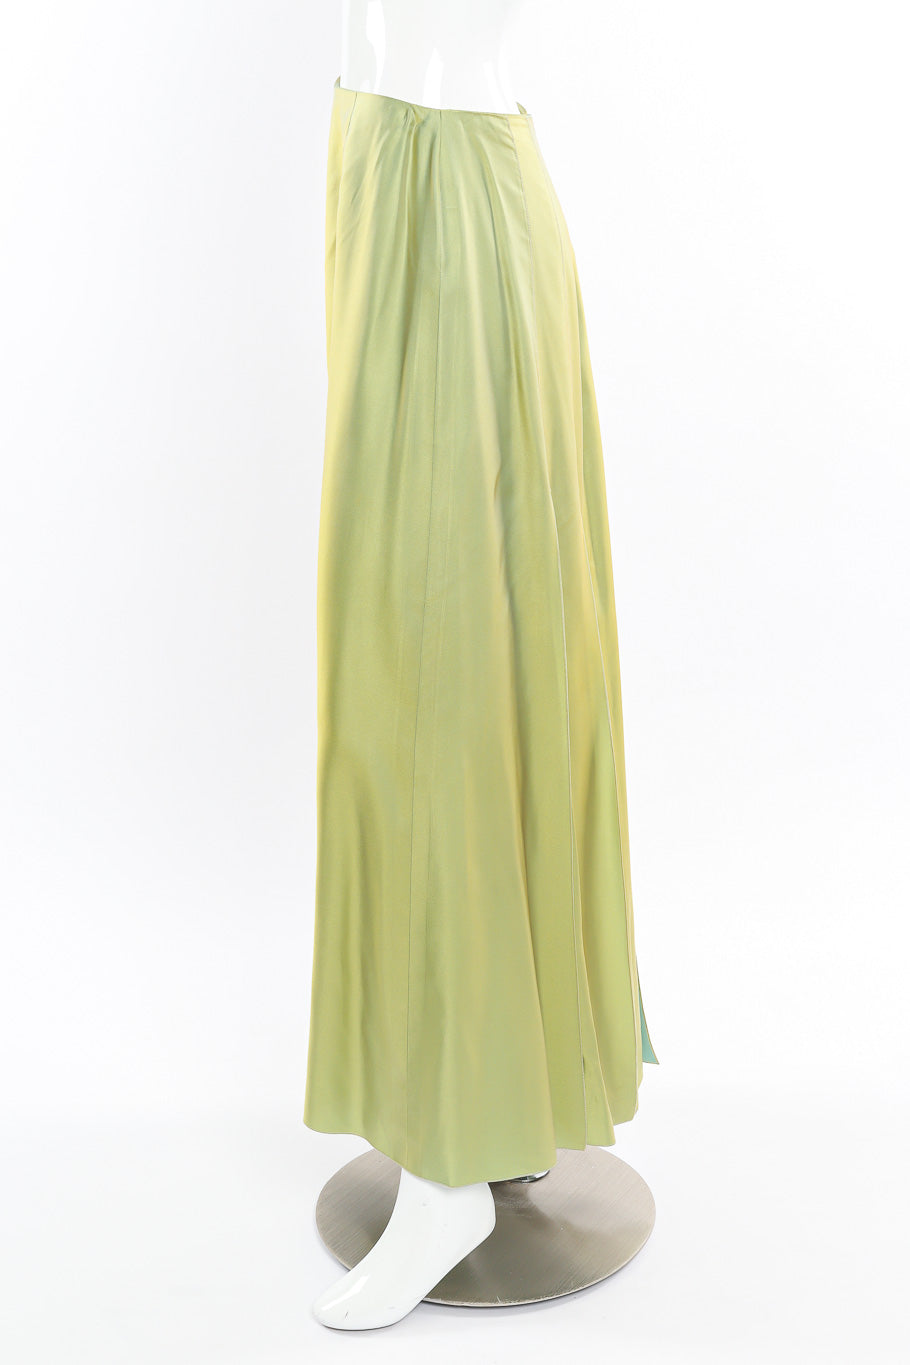 Iridescent maxi skirt by Chanel on mannequin side @recessla